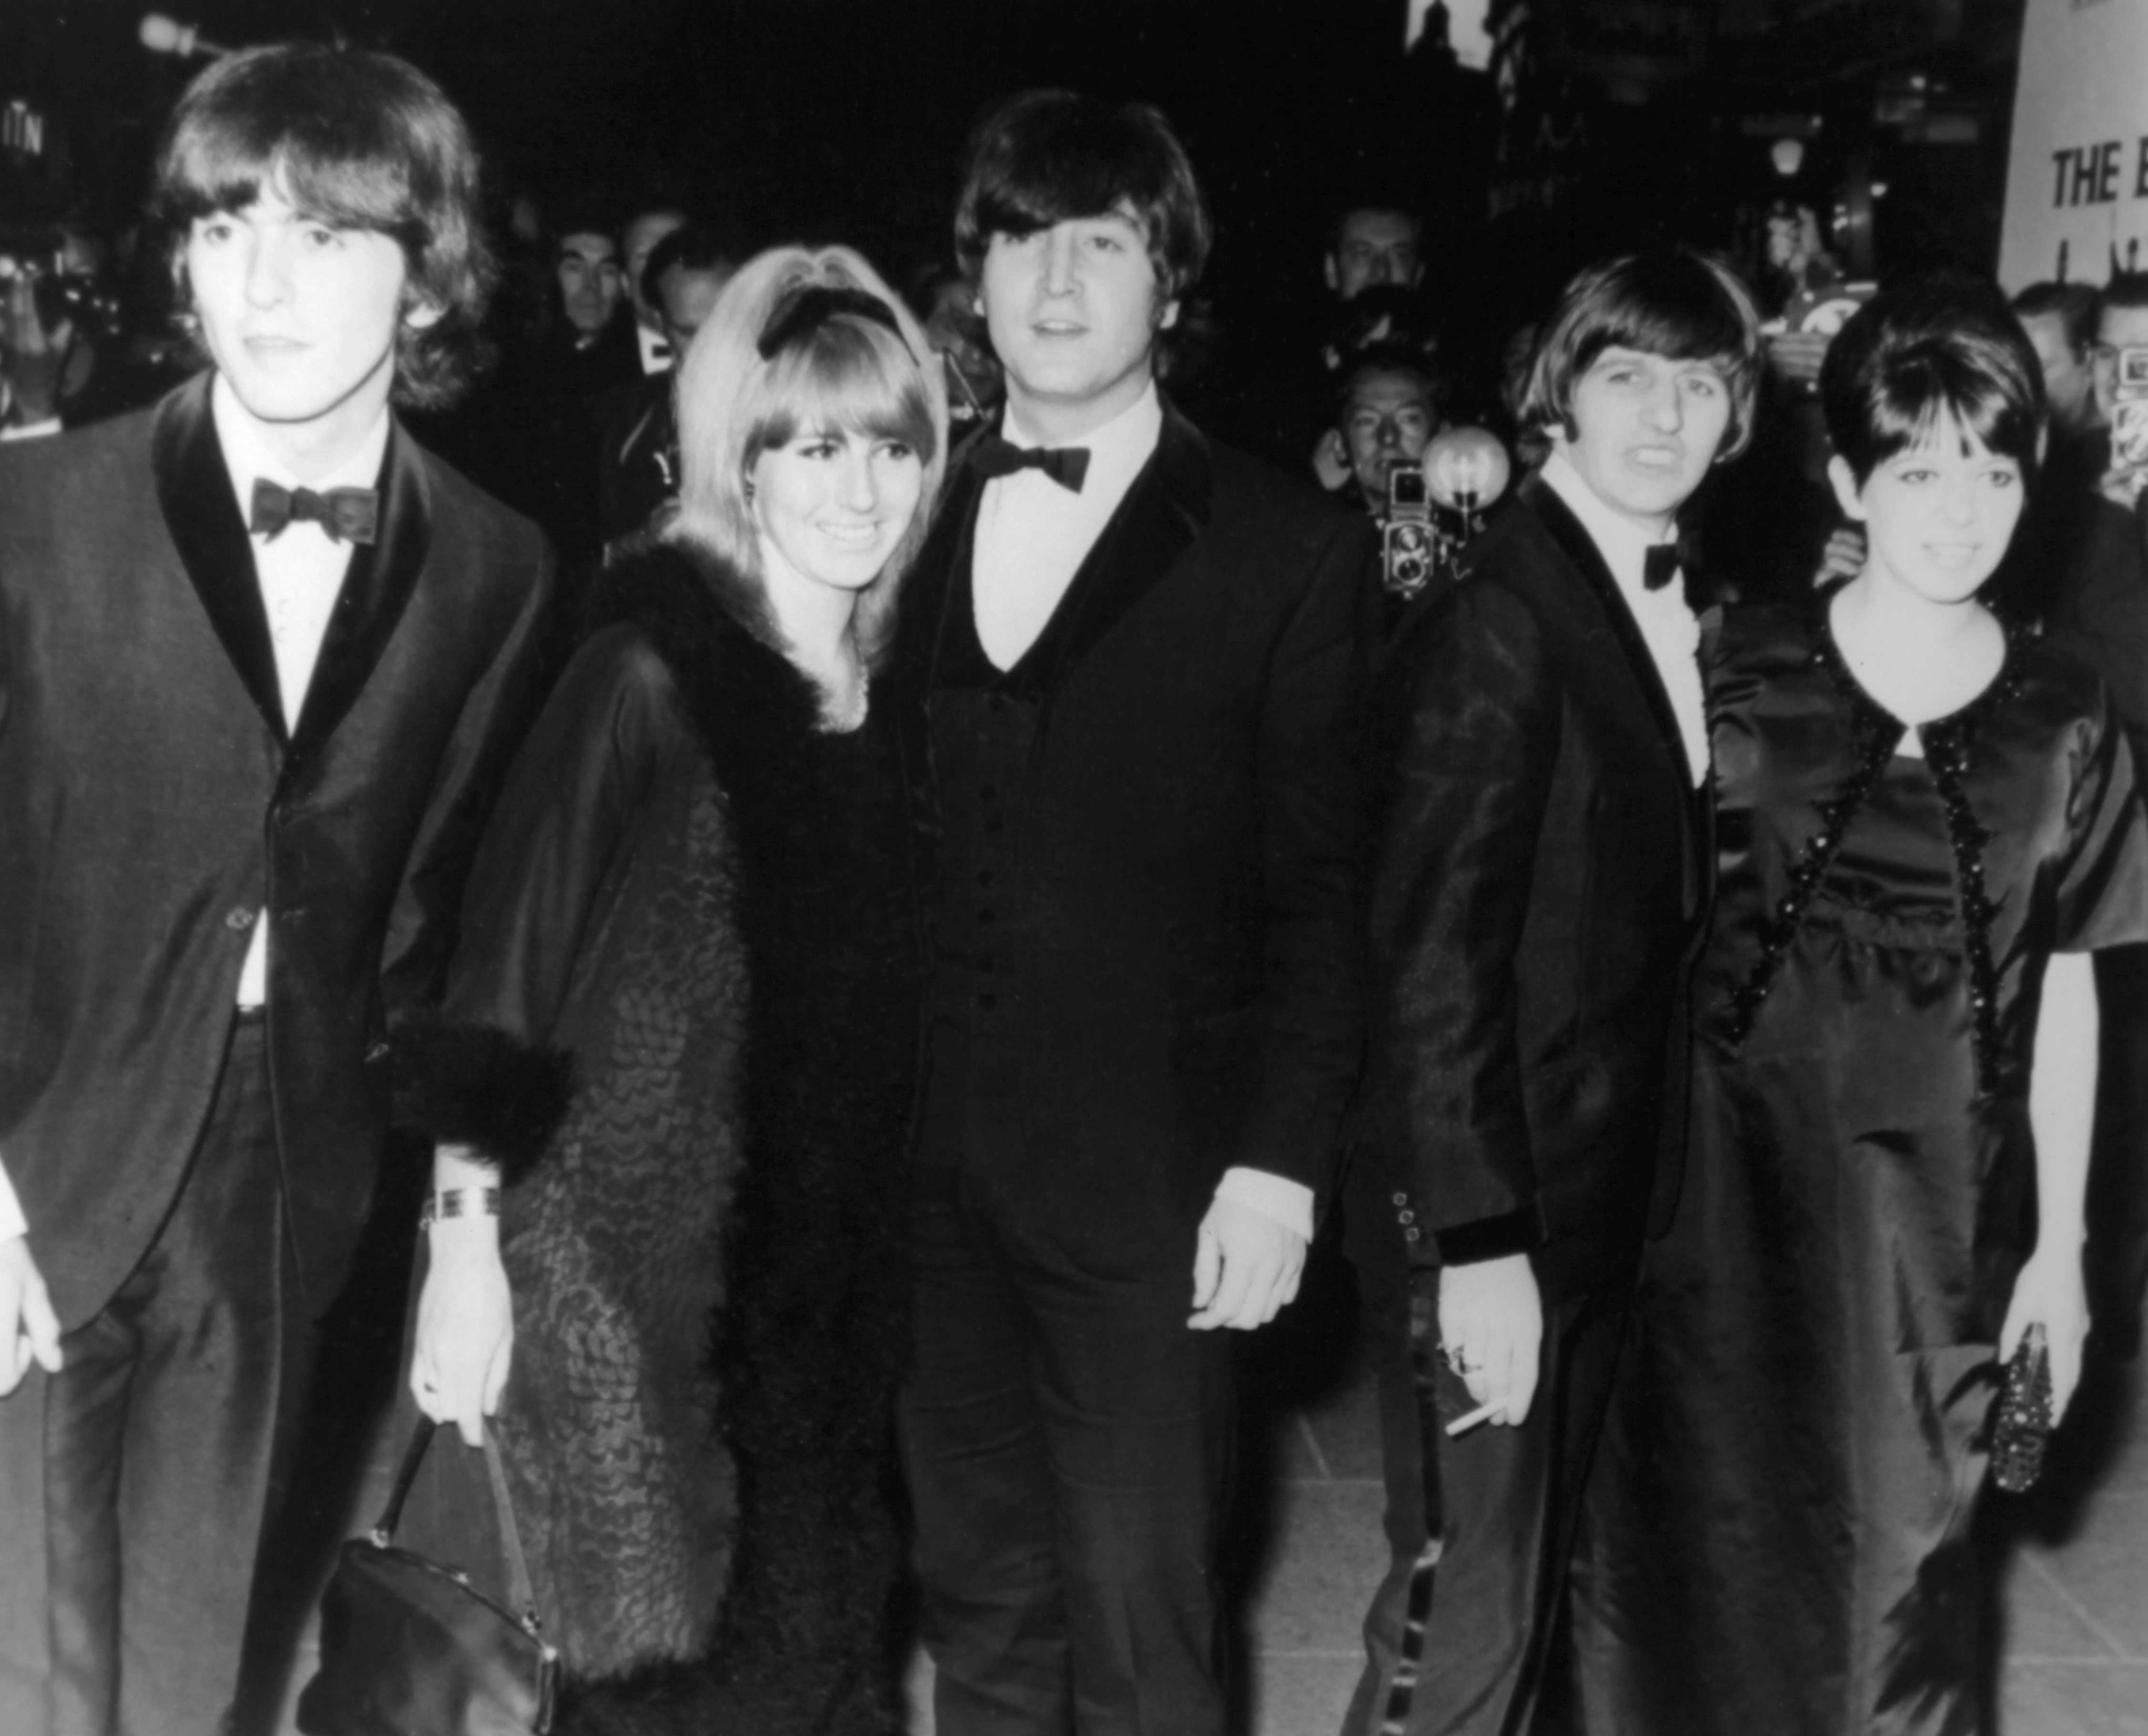 George Harrison, John Lennon with his wife Cynthia Powell, Ringo Starr and his wife Maureen Cox arrive at the premiere of their movie 'Help' directed by Richard Lester at the London Pavilion on July 29, 1965 in London, United Kingdom.